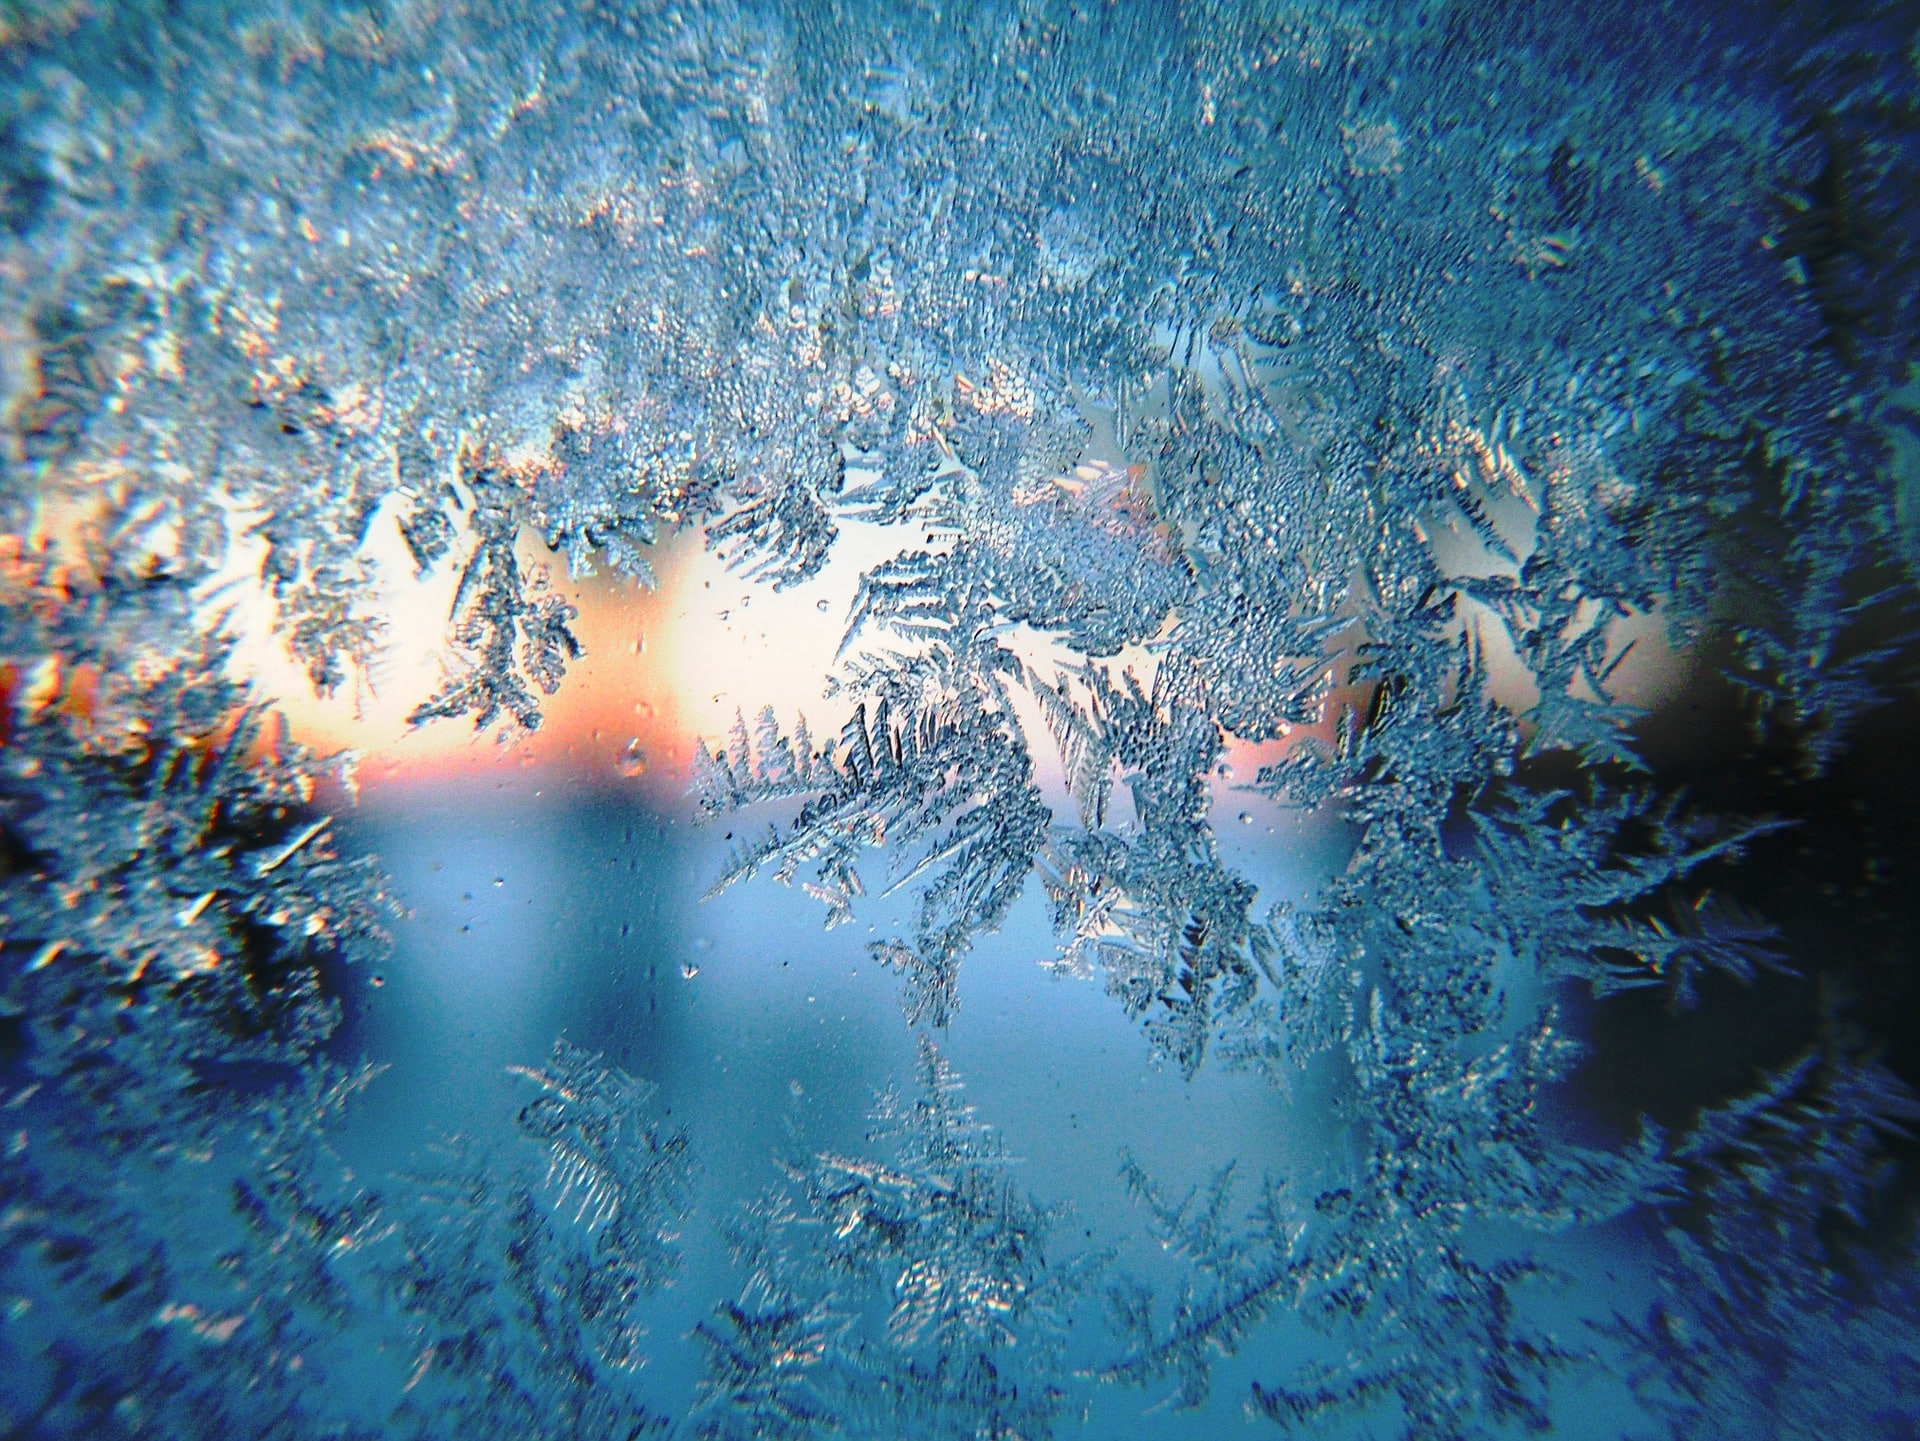 Frost on top of glass